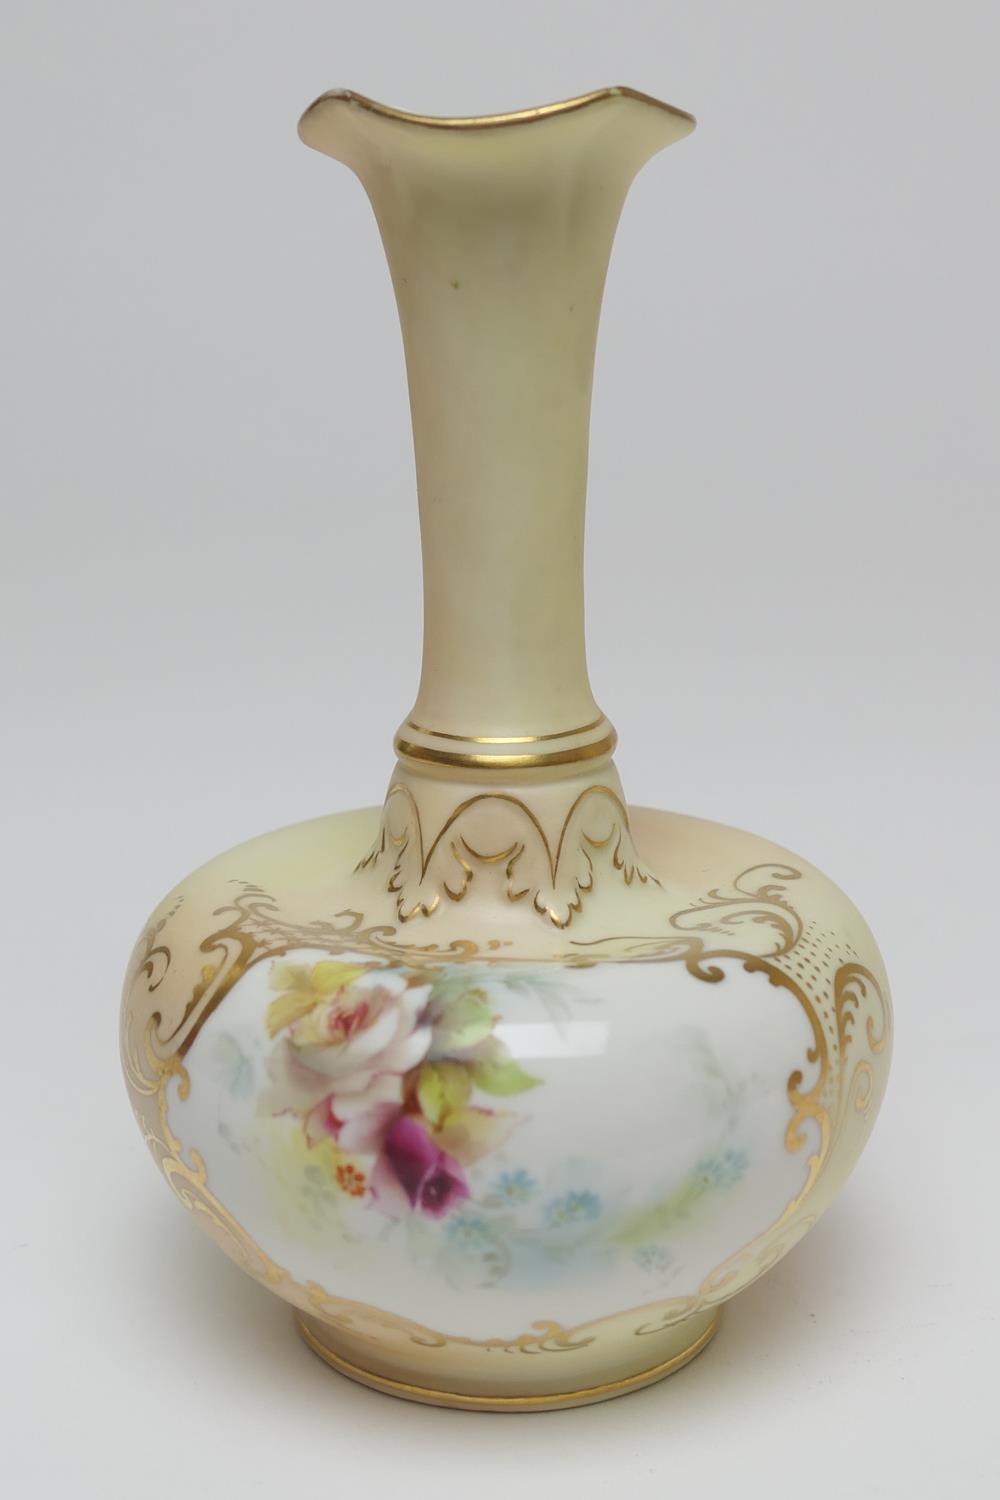 Grainger & Co. Worcester vase, circa 1897, shape G685, decorated with a view of Anne Hathaway's - Image 8 of 15